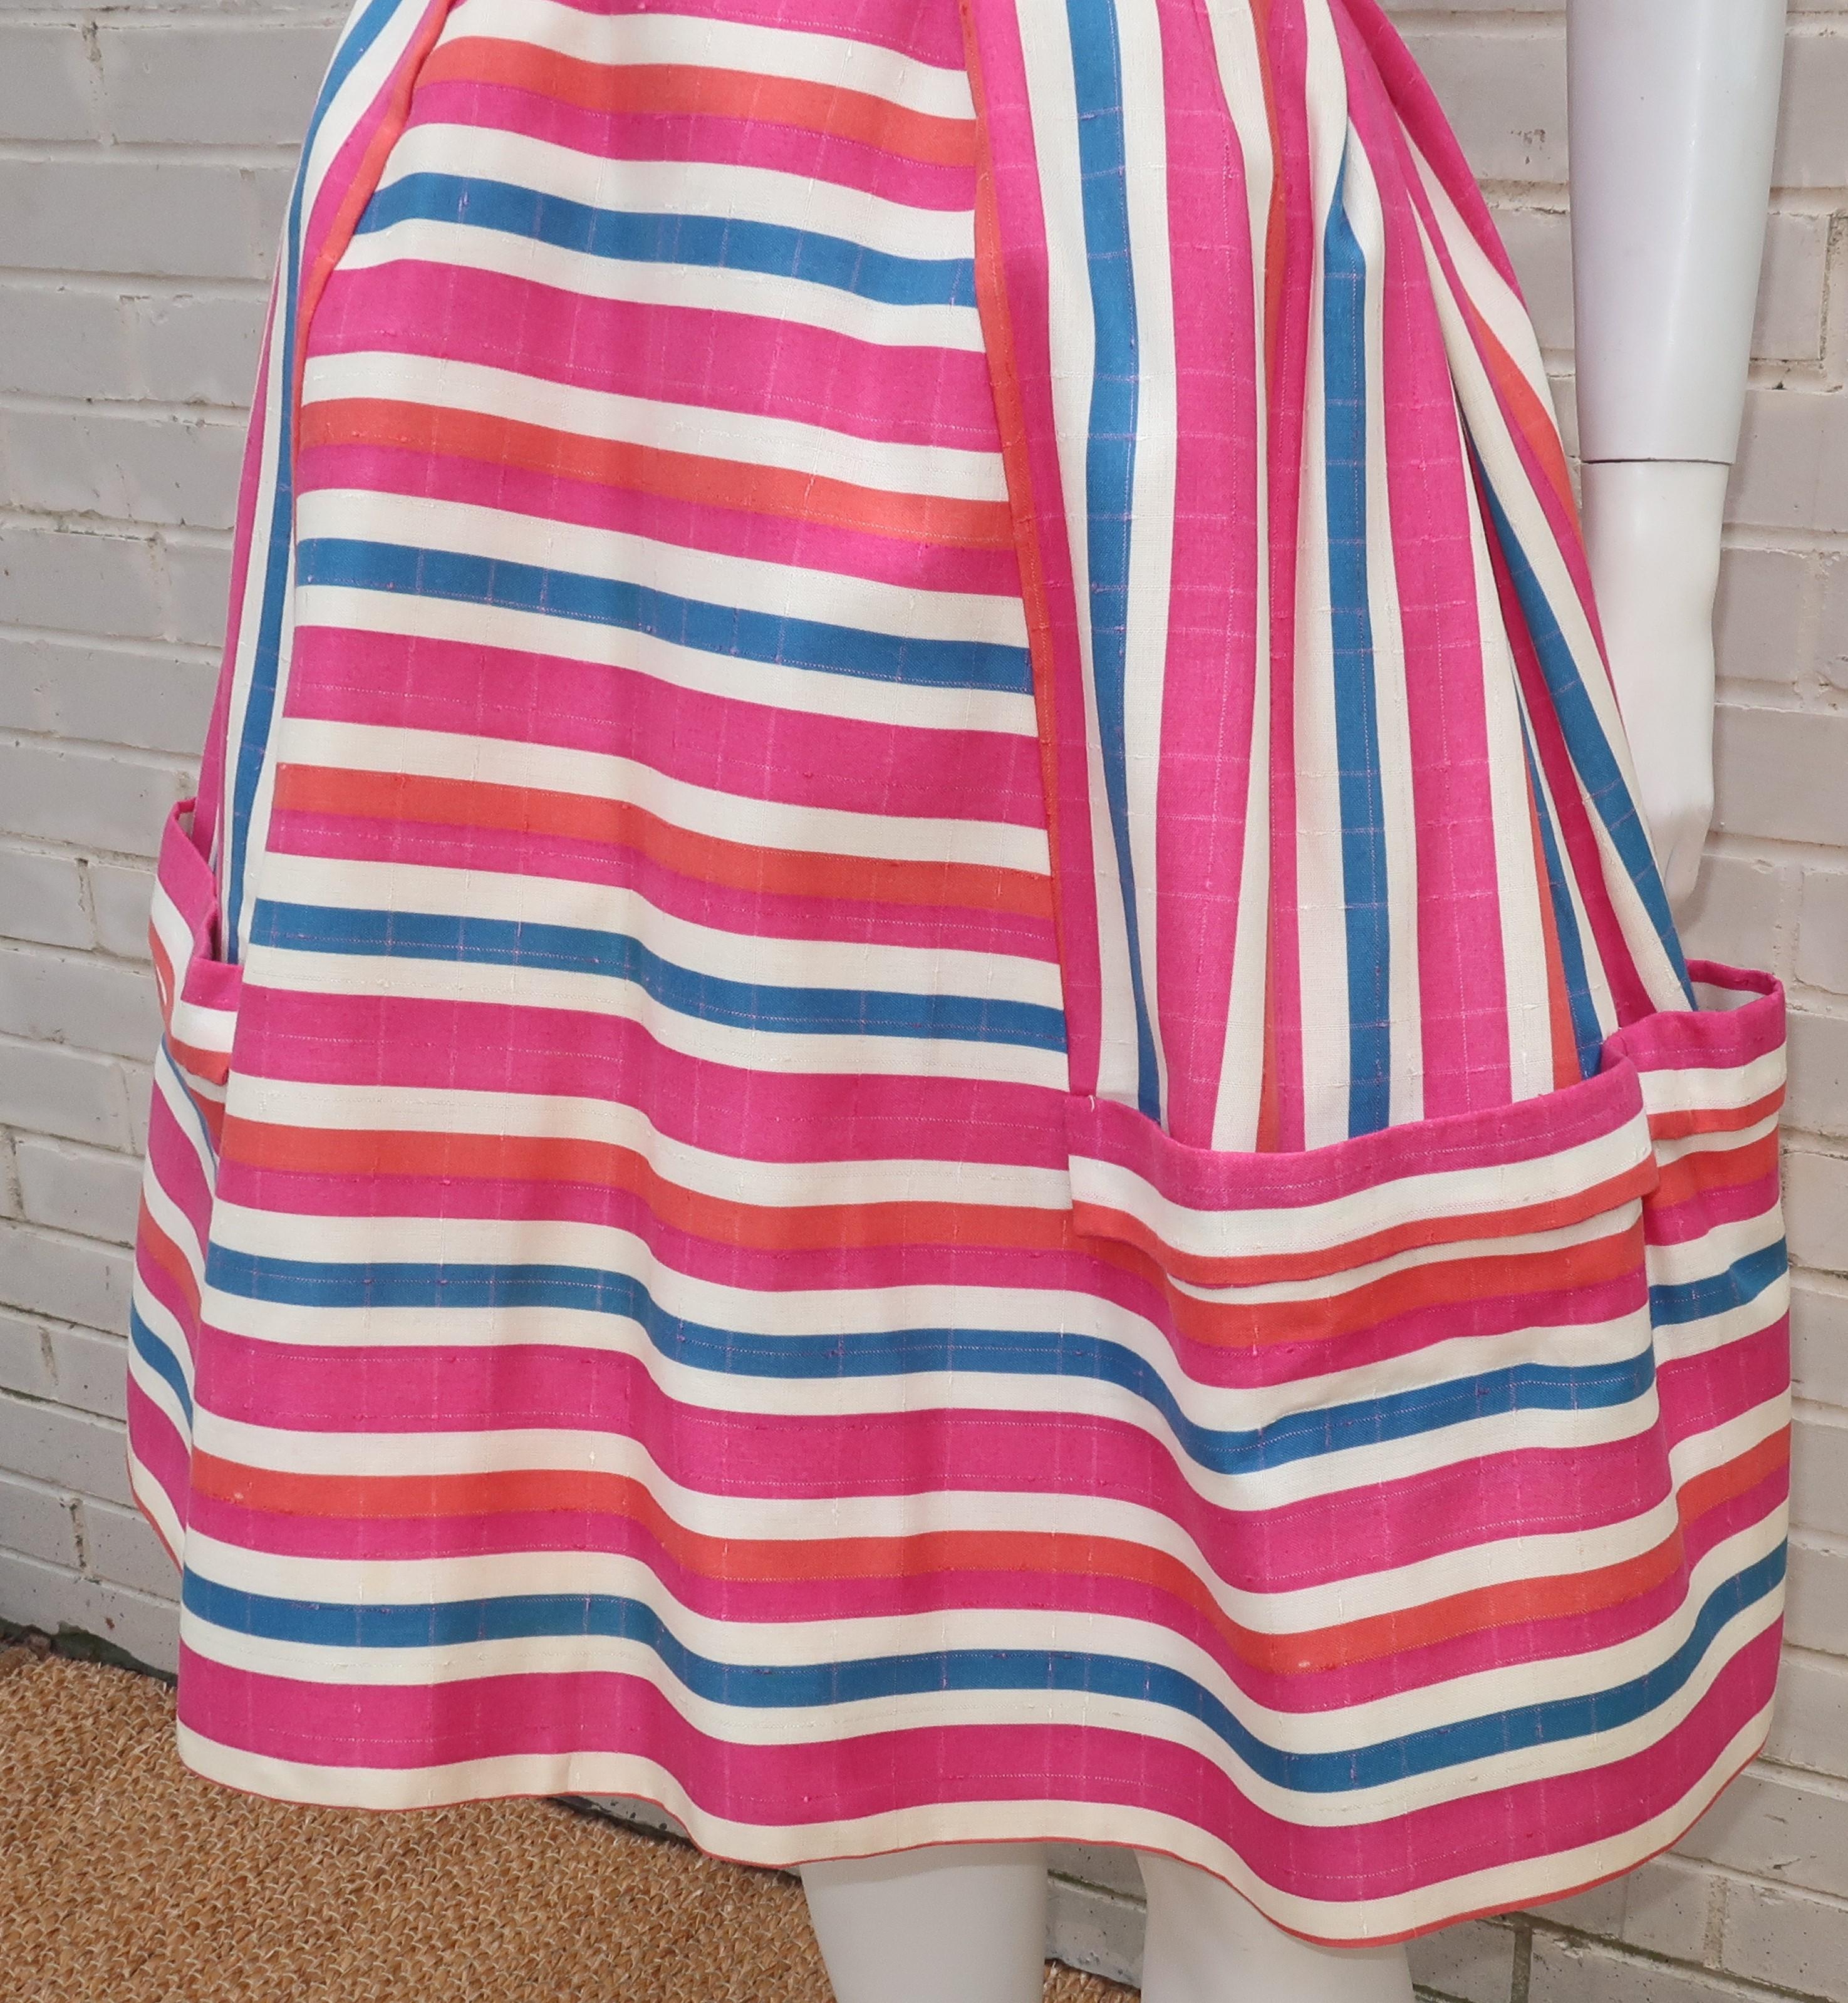 Striped Linen Sun Dress With Built-in Crinoline, C.1960 For Sale 3